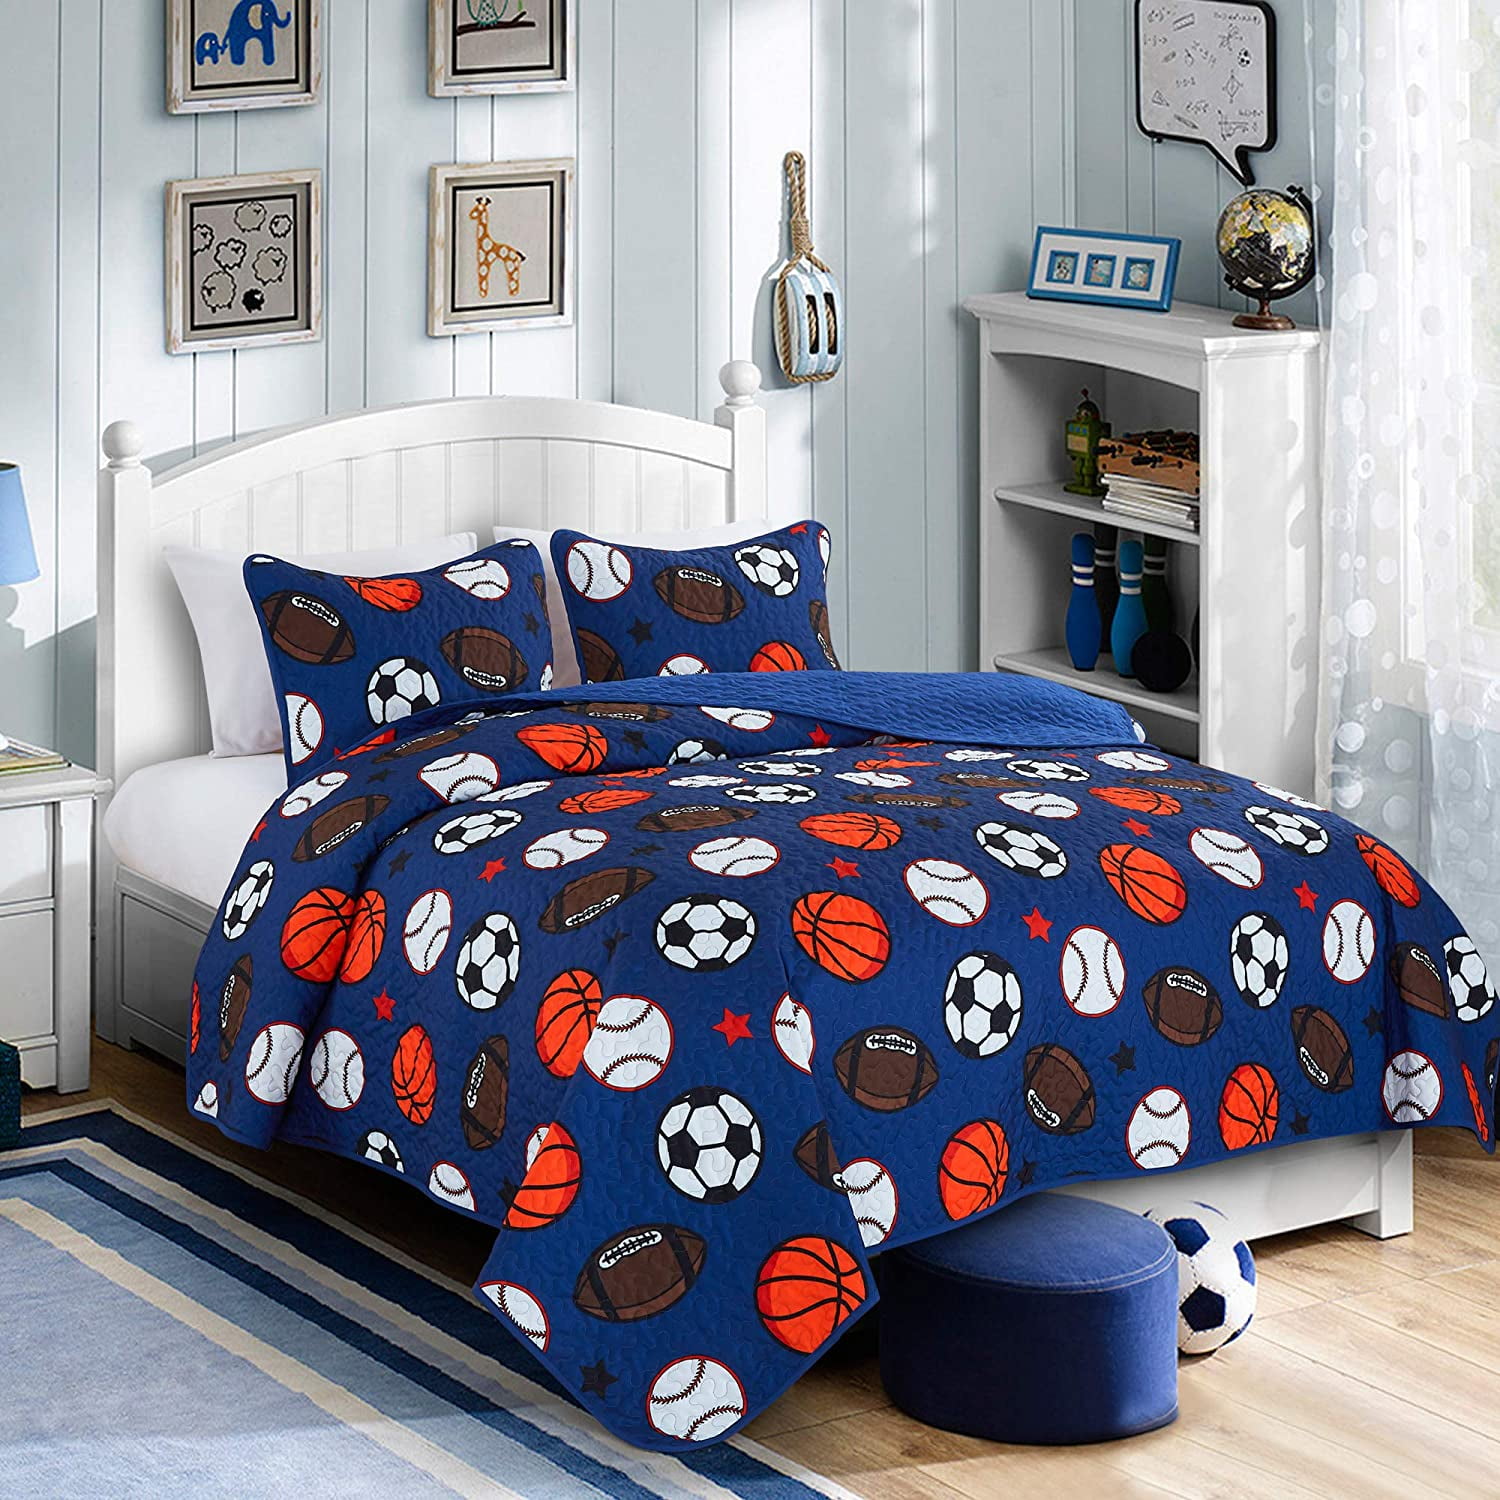 Fun Multi Soccer Ball Baseball Basketball Football Patch Work Themed Pattern Blue Orange Red Tan Brown 3 Piece Boys Sports Quilt Full Queen Set Kids All Over Patchwork All Star Plaid Sport Bedding 